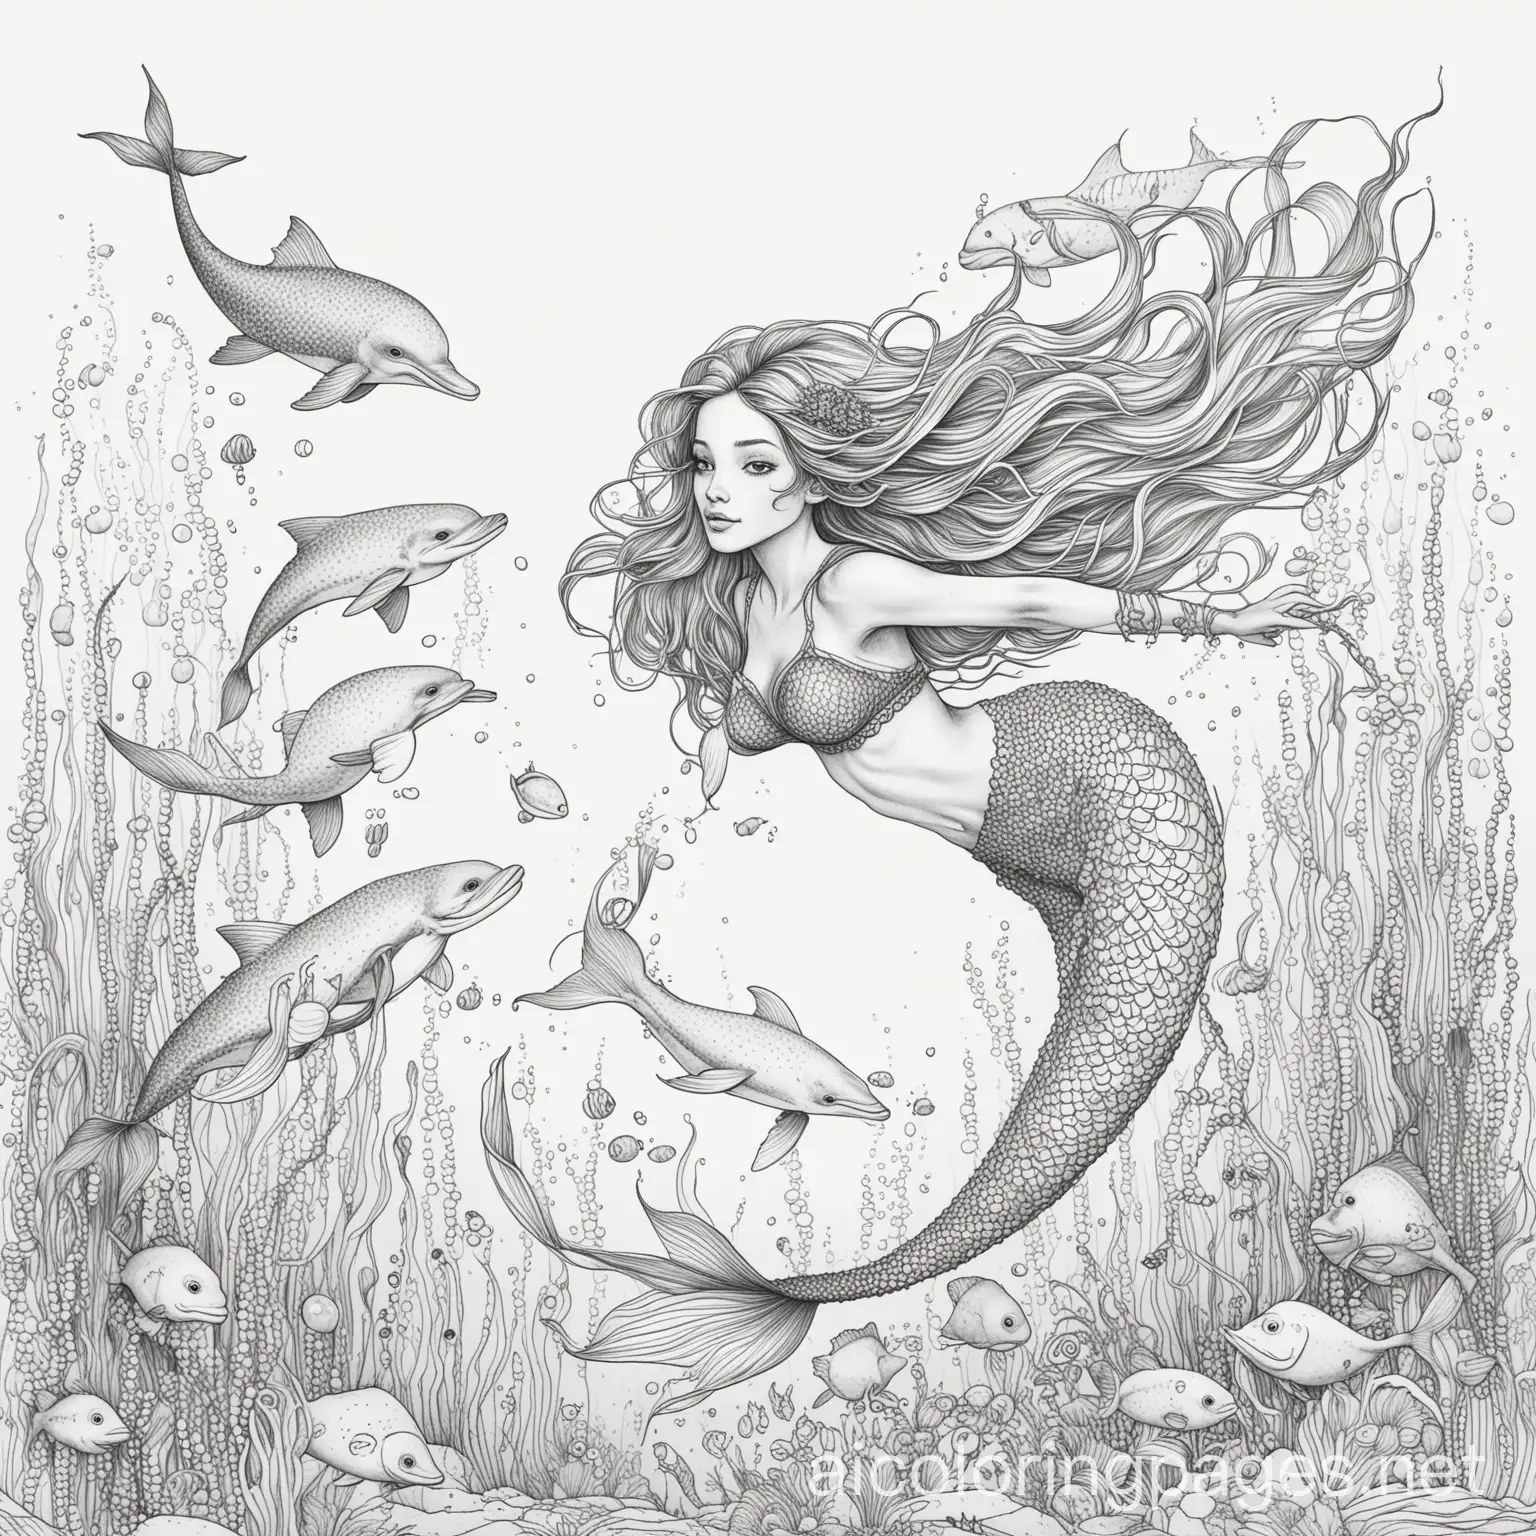 Mermaid swimming with dolphins and fish , Coloring Page, black and white, line art, white background, Simplicity, Ample White Space. The background of the coloring page is plain white to make it easy for young children to color within the lines. The outlines of all the subjects are easy to distinguish, making it simple for kids to color without too much difficulty